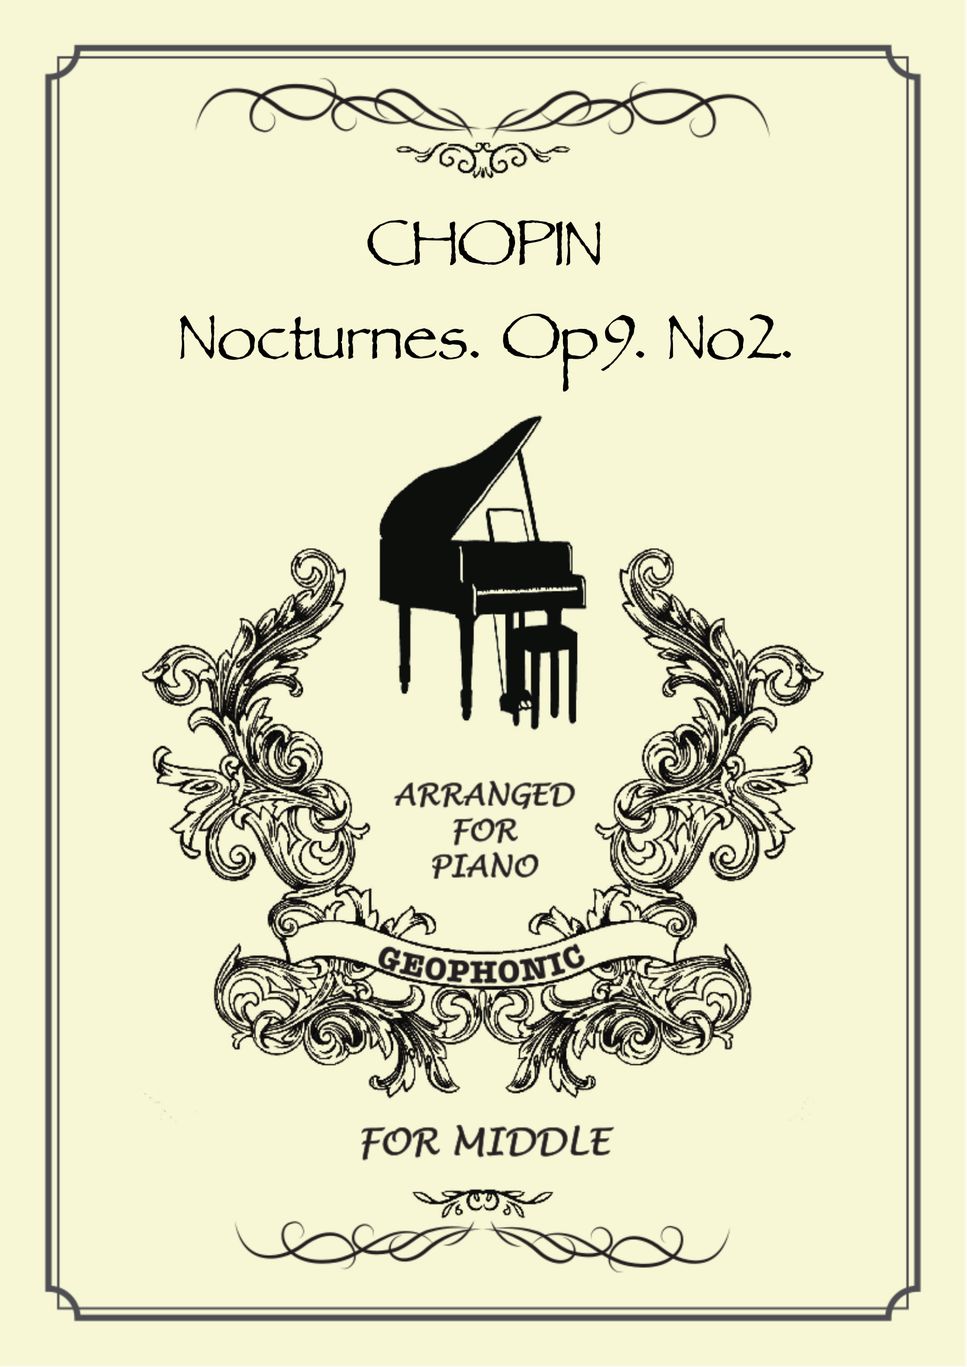 Chopin - Nocturne Op.9 No.2. by GEOPHONIC